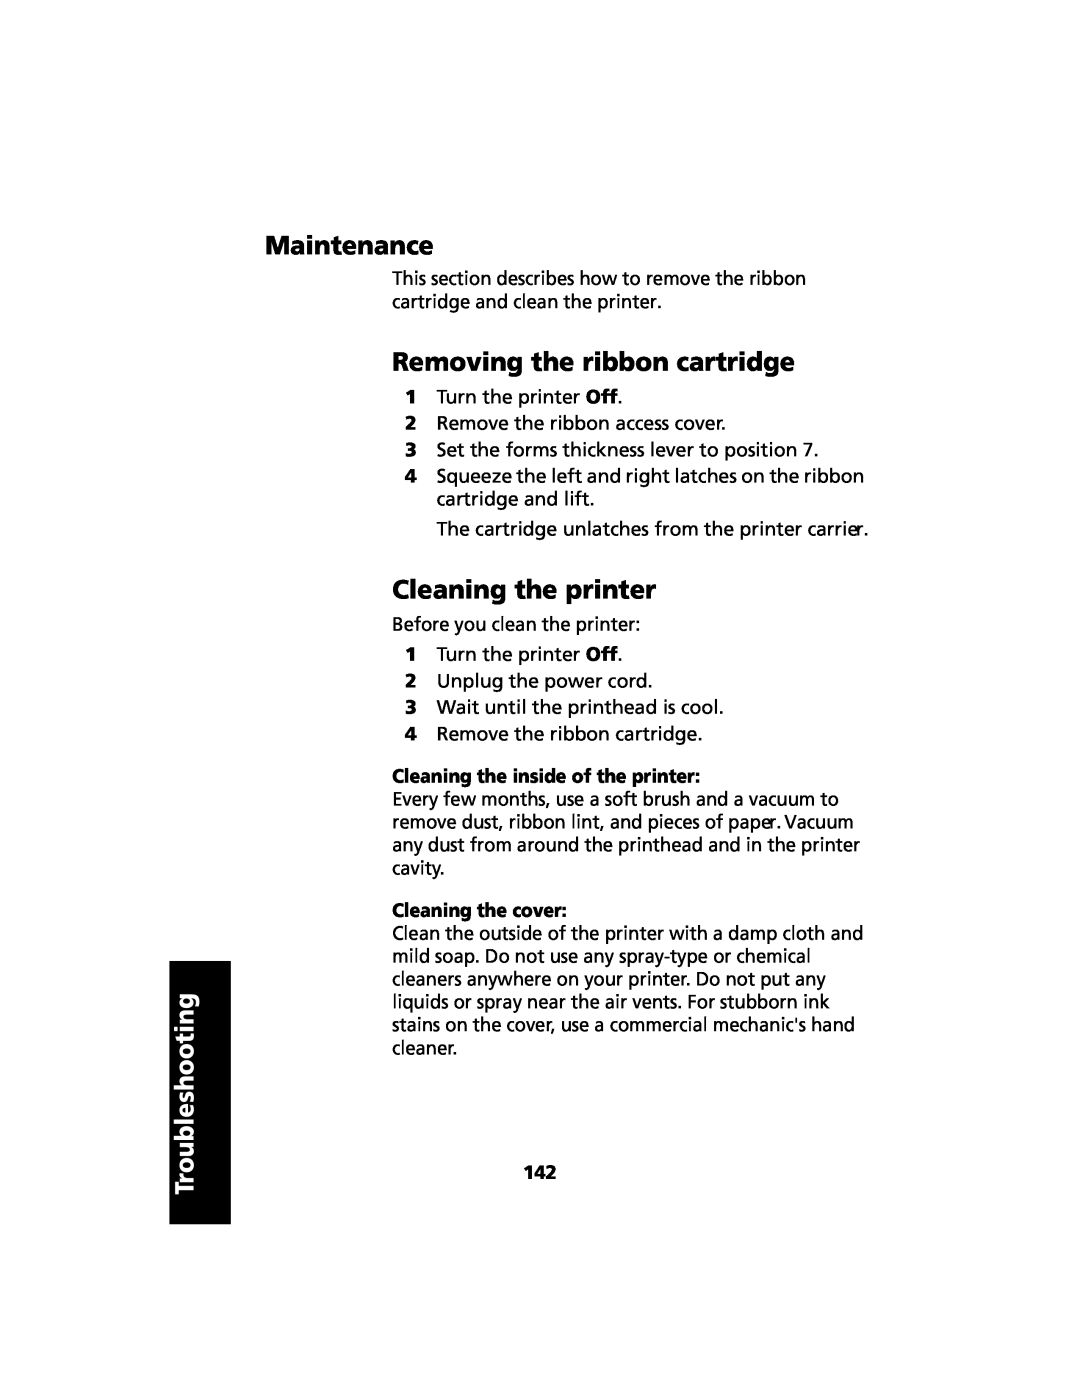 Lexmark 2480 manual Maintenance, Removing the ribbon cartridge, Cleaning the printer, Cleaning the inside of the printer 